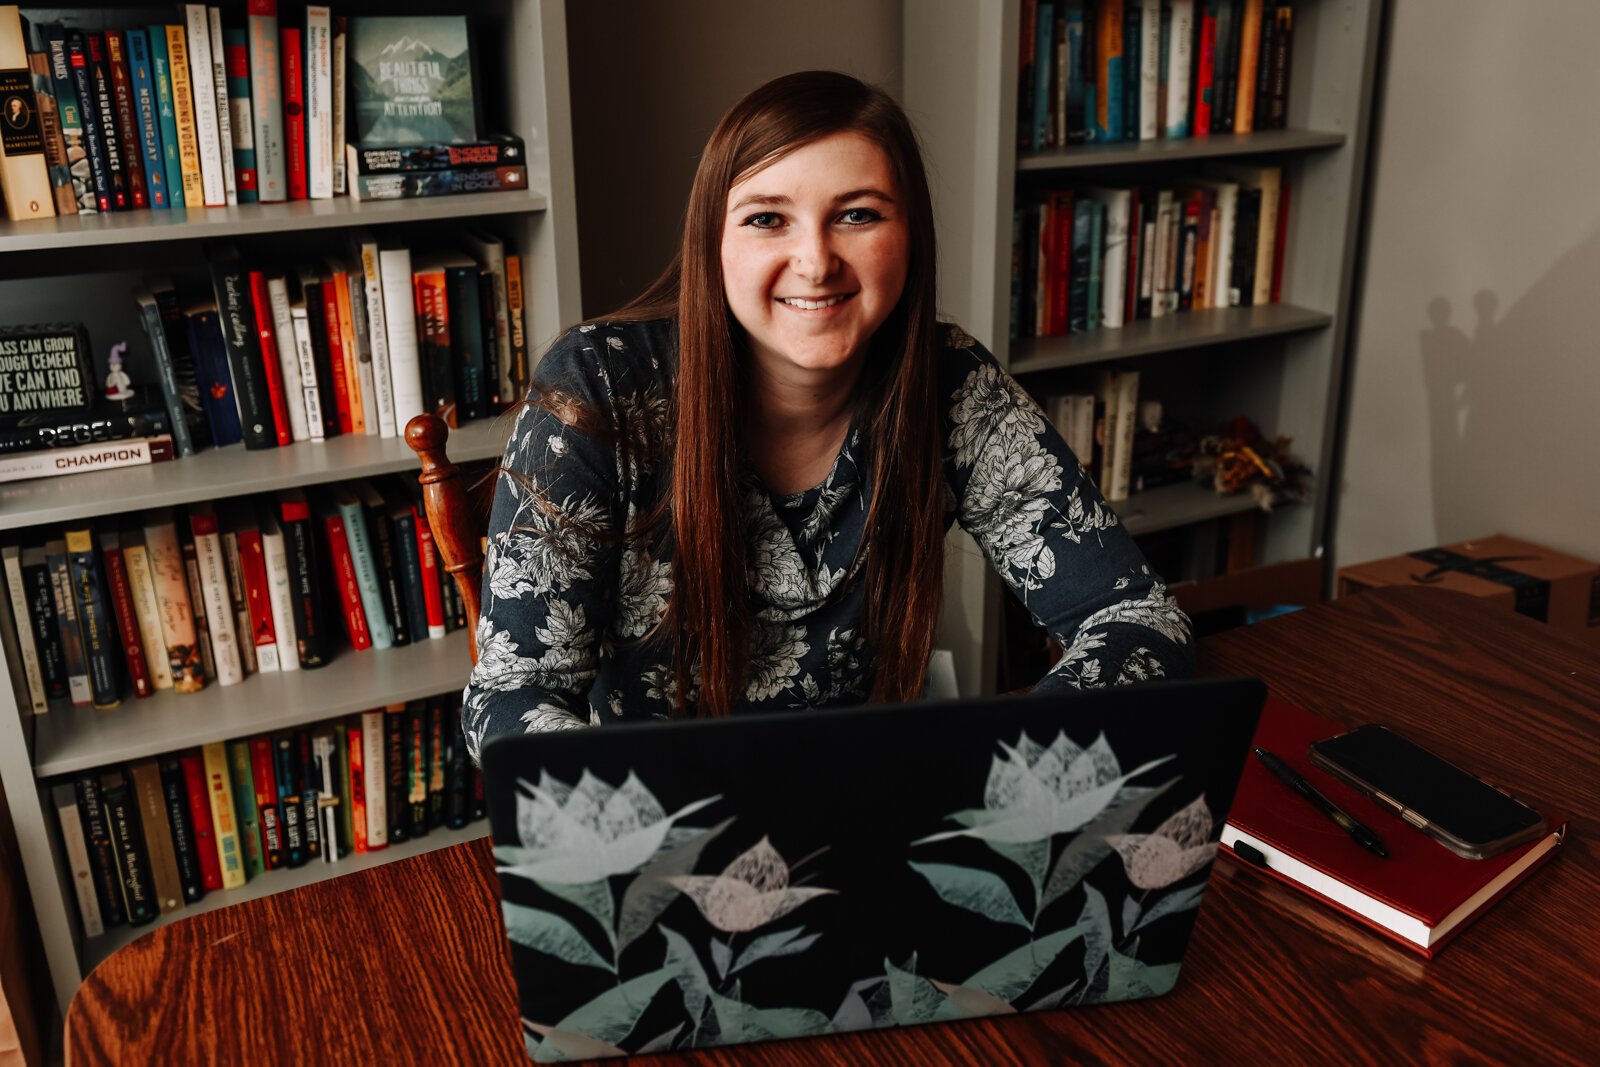 Bailey Gerber works from home as a Content Creator in the marketing department for Indiana Wesleyan University-National & Global.